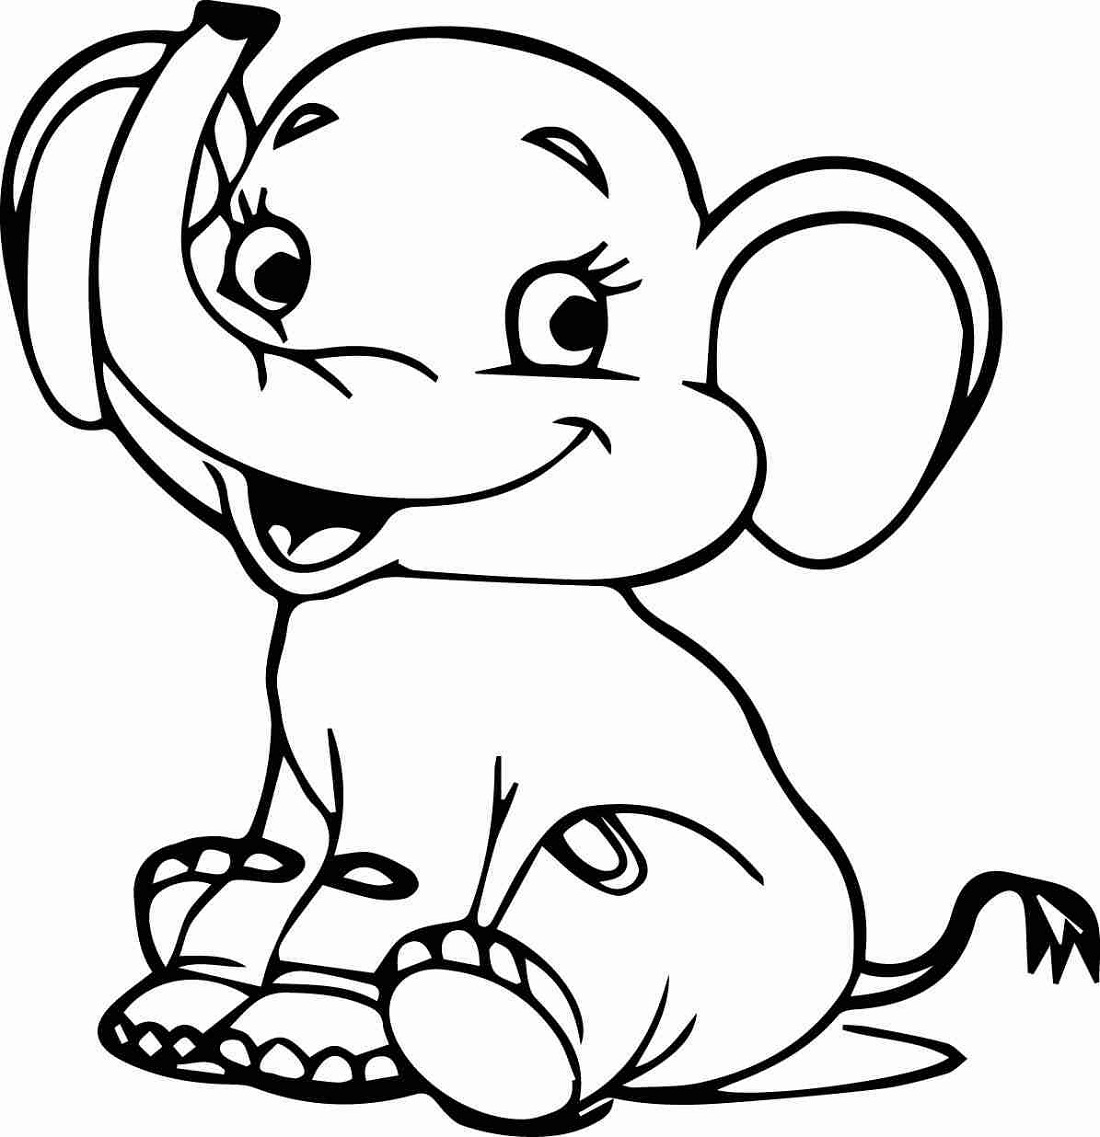 Baby Elephant Coloring Pages for Kindergarten   Activity Shelter